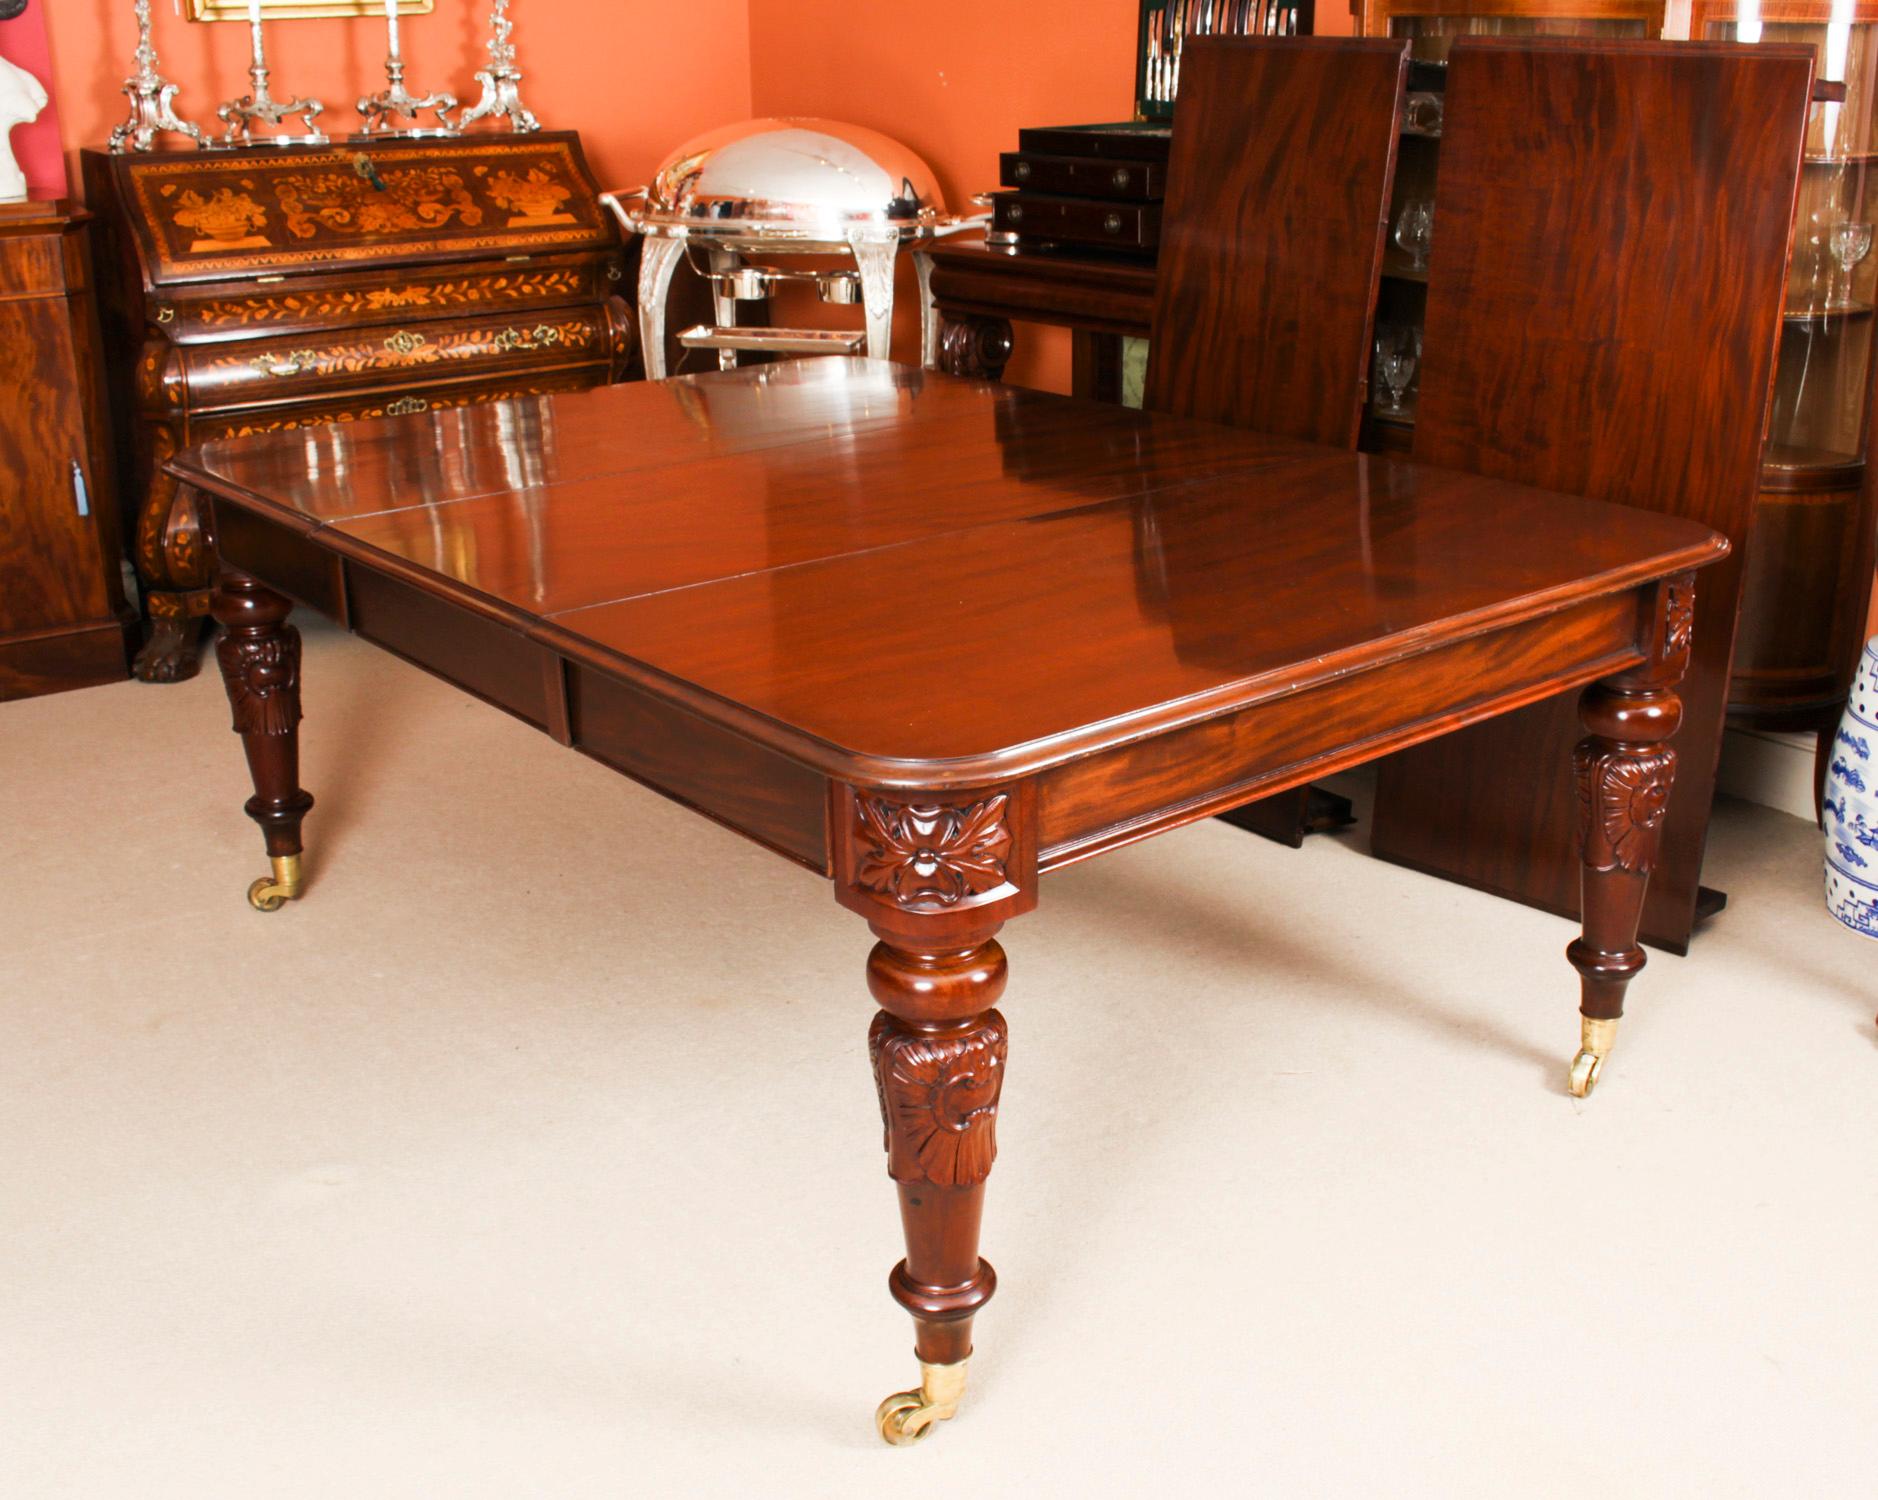 Mid-19th Century Antique William IV Mahogany Dining Table & 10 Regency Dining Chairs 19th C